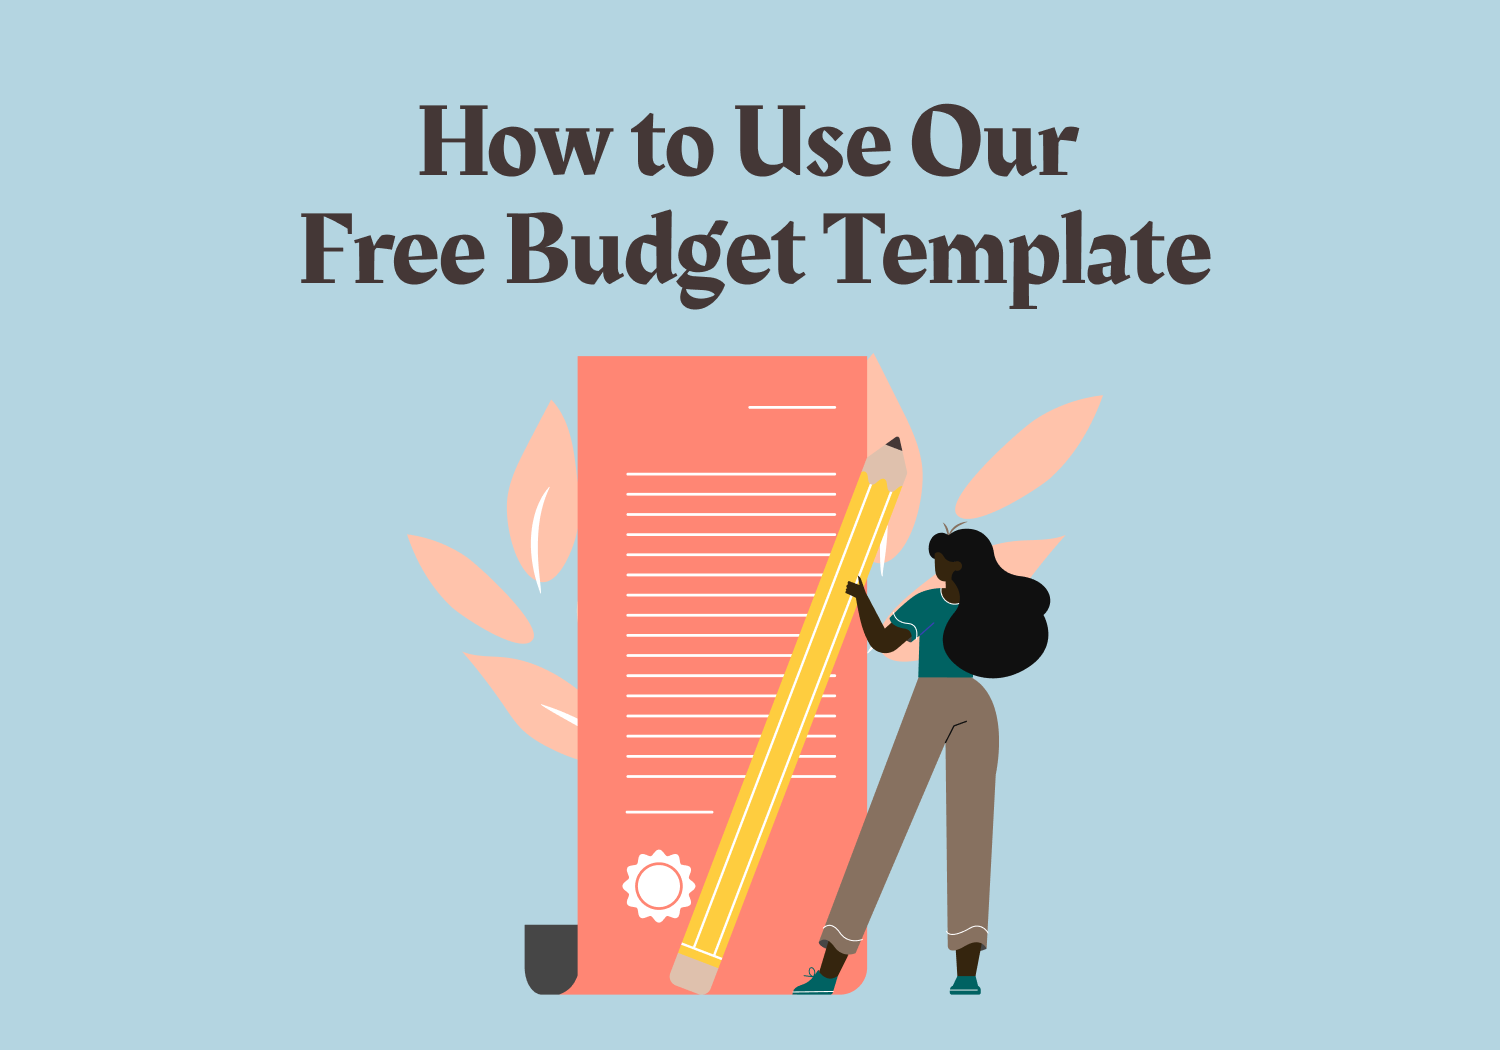 How to use our free budget template